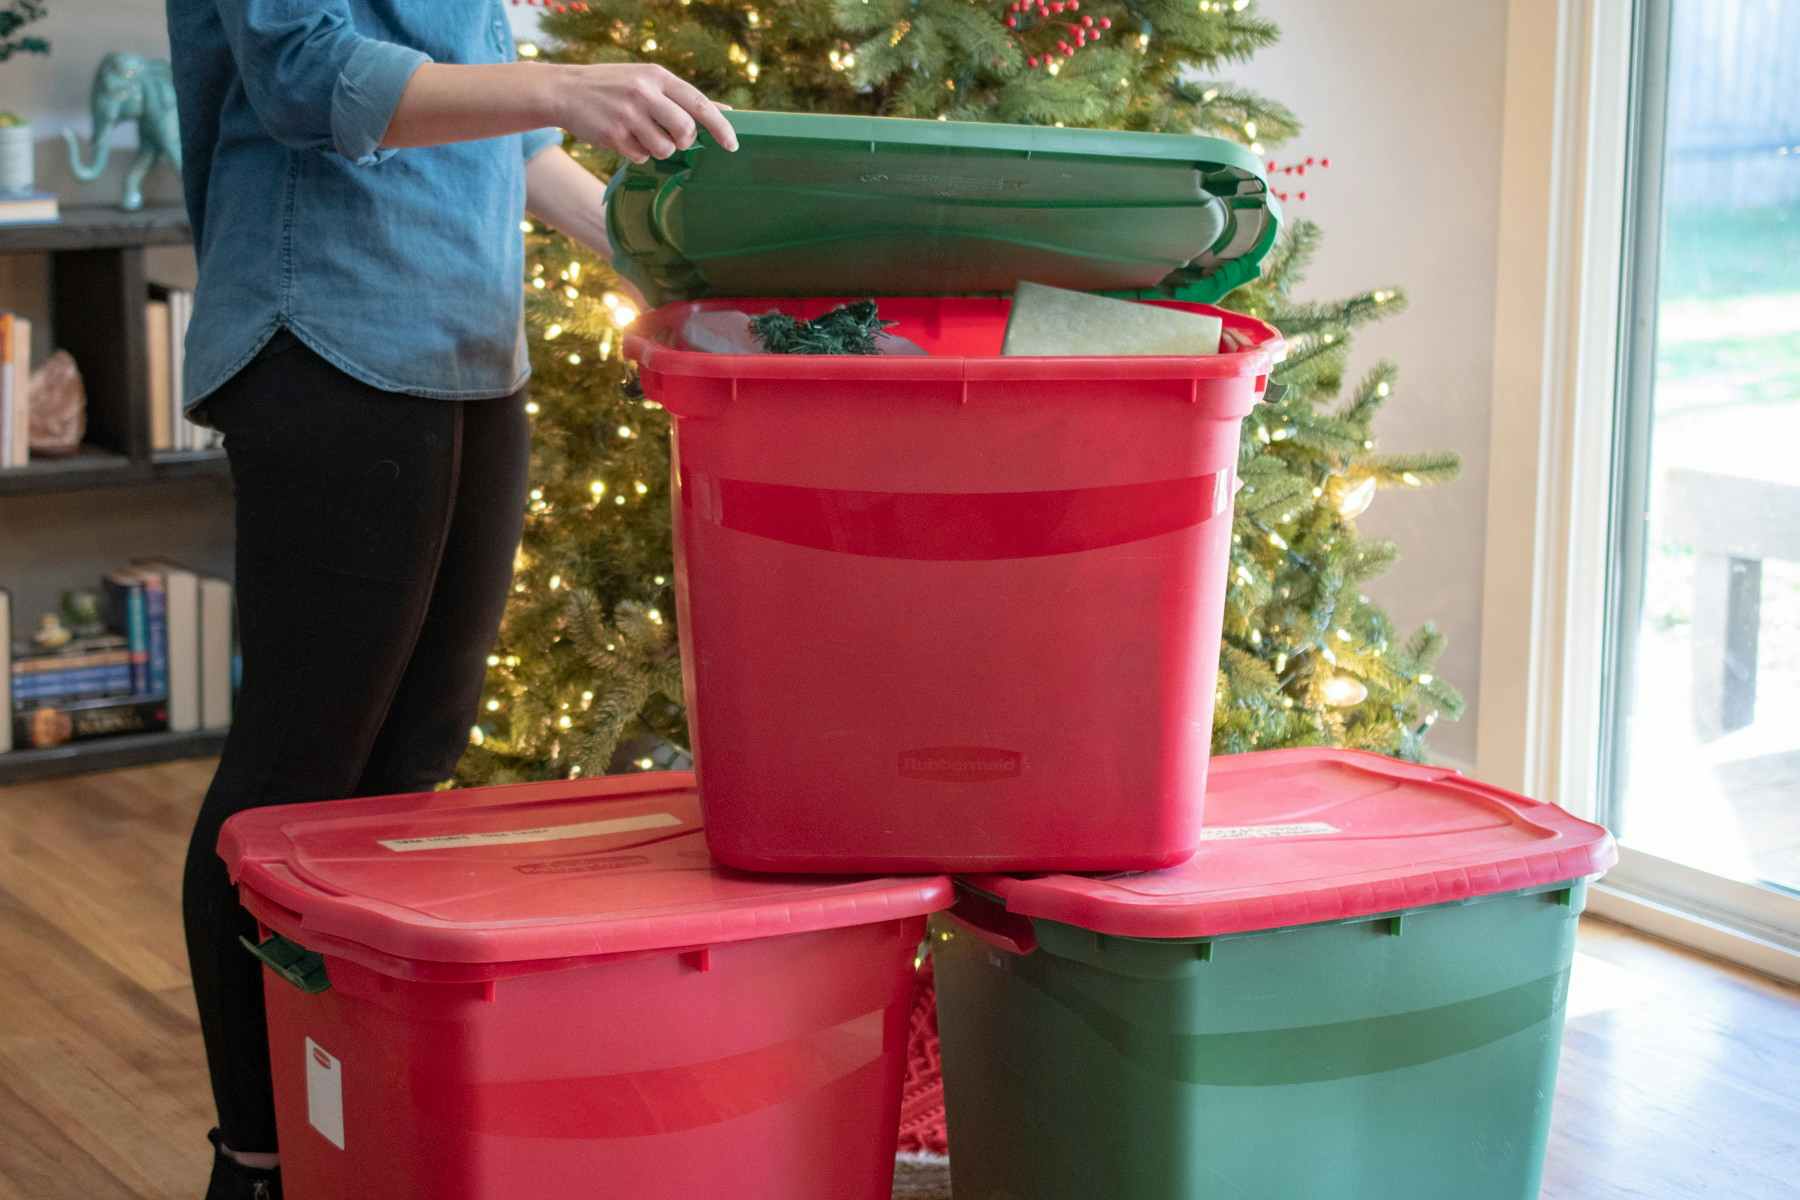 Three storage bins, all green and red in front of a Christmas tree. A person is opening one of them.